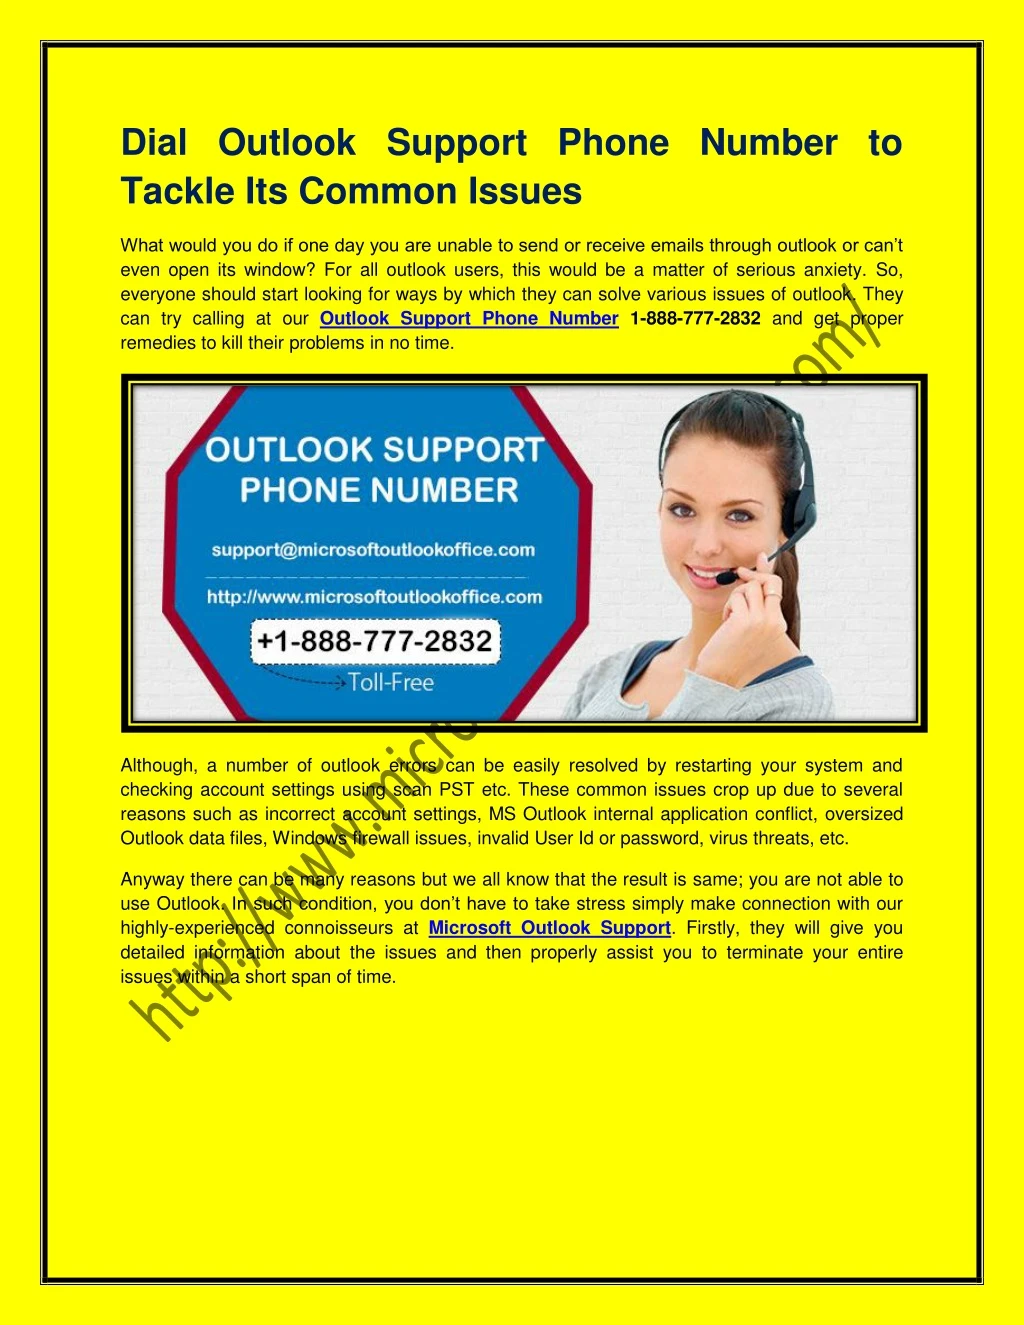 dial outlook support phone number to tackle